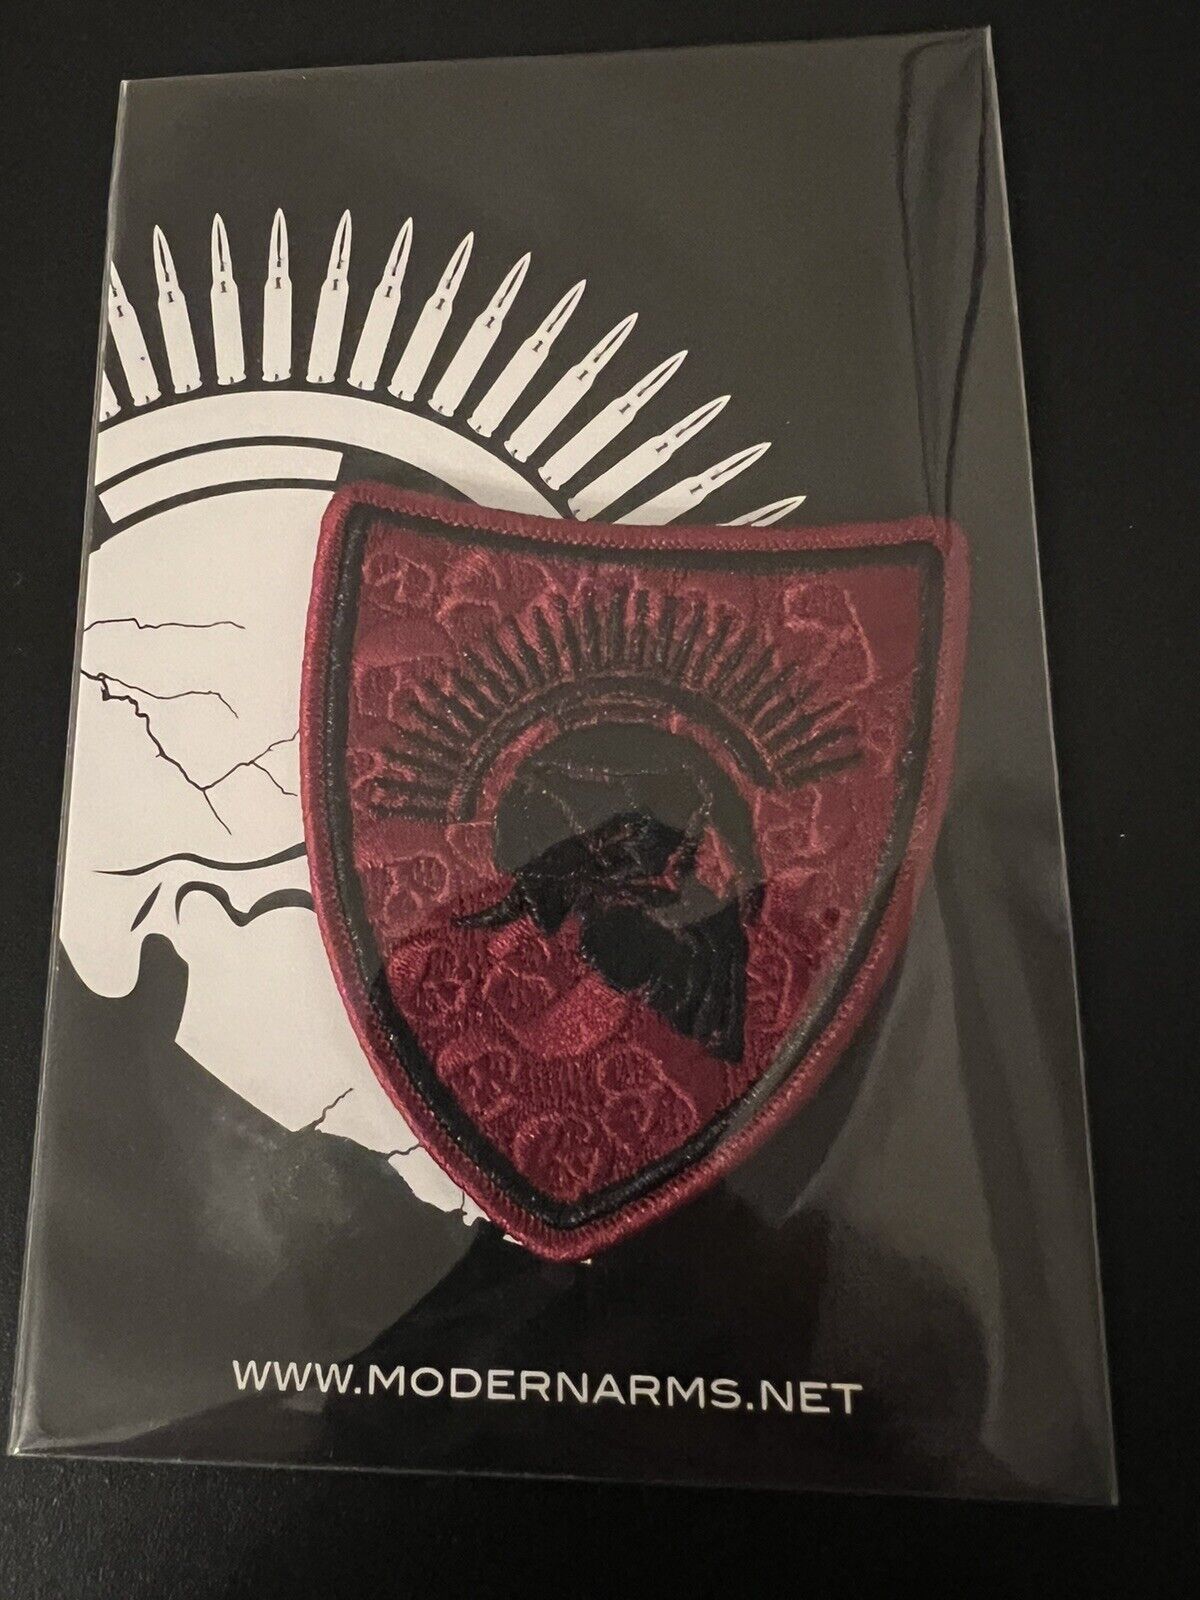 Modern Arms:, Blood Spartan Quilted Morale patches. NEW Artifact Ltd125